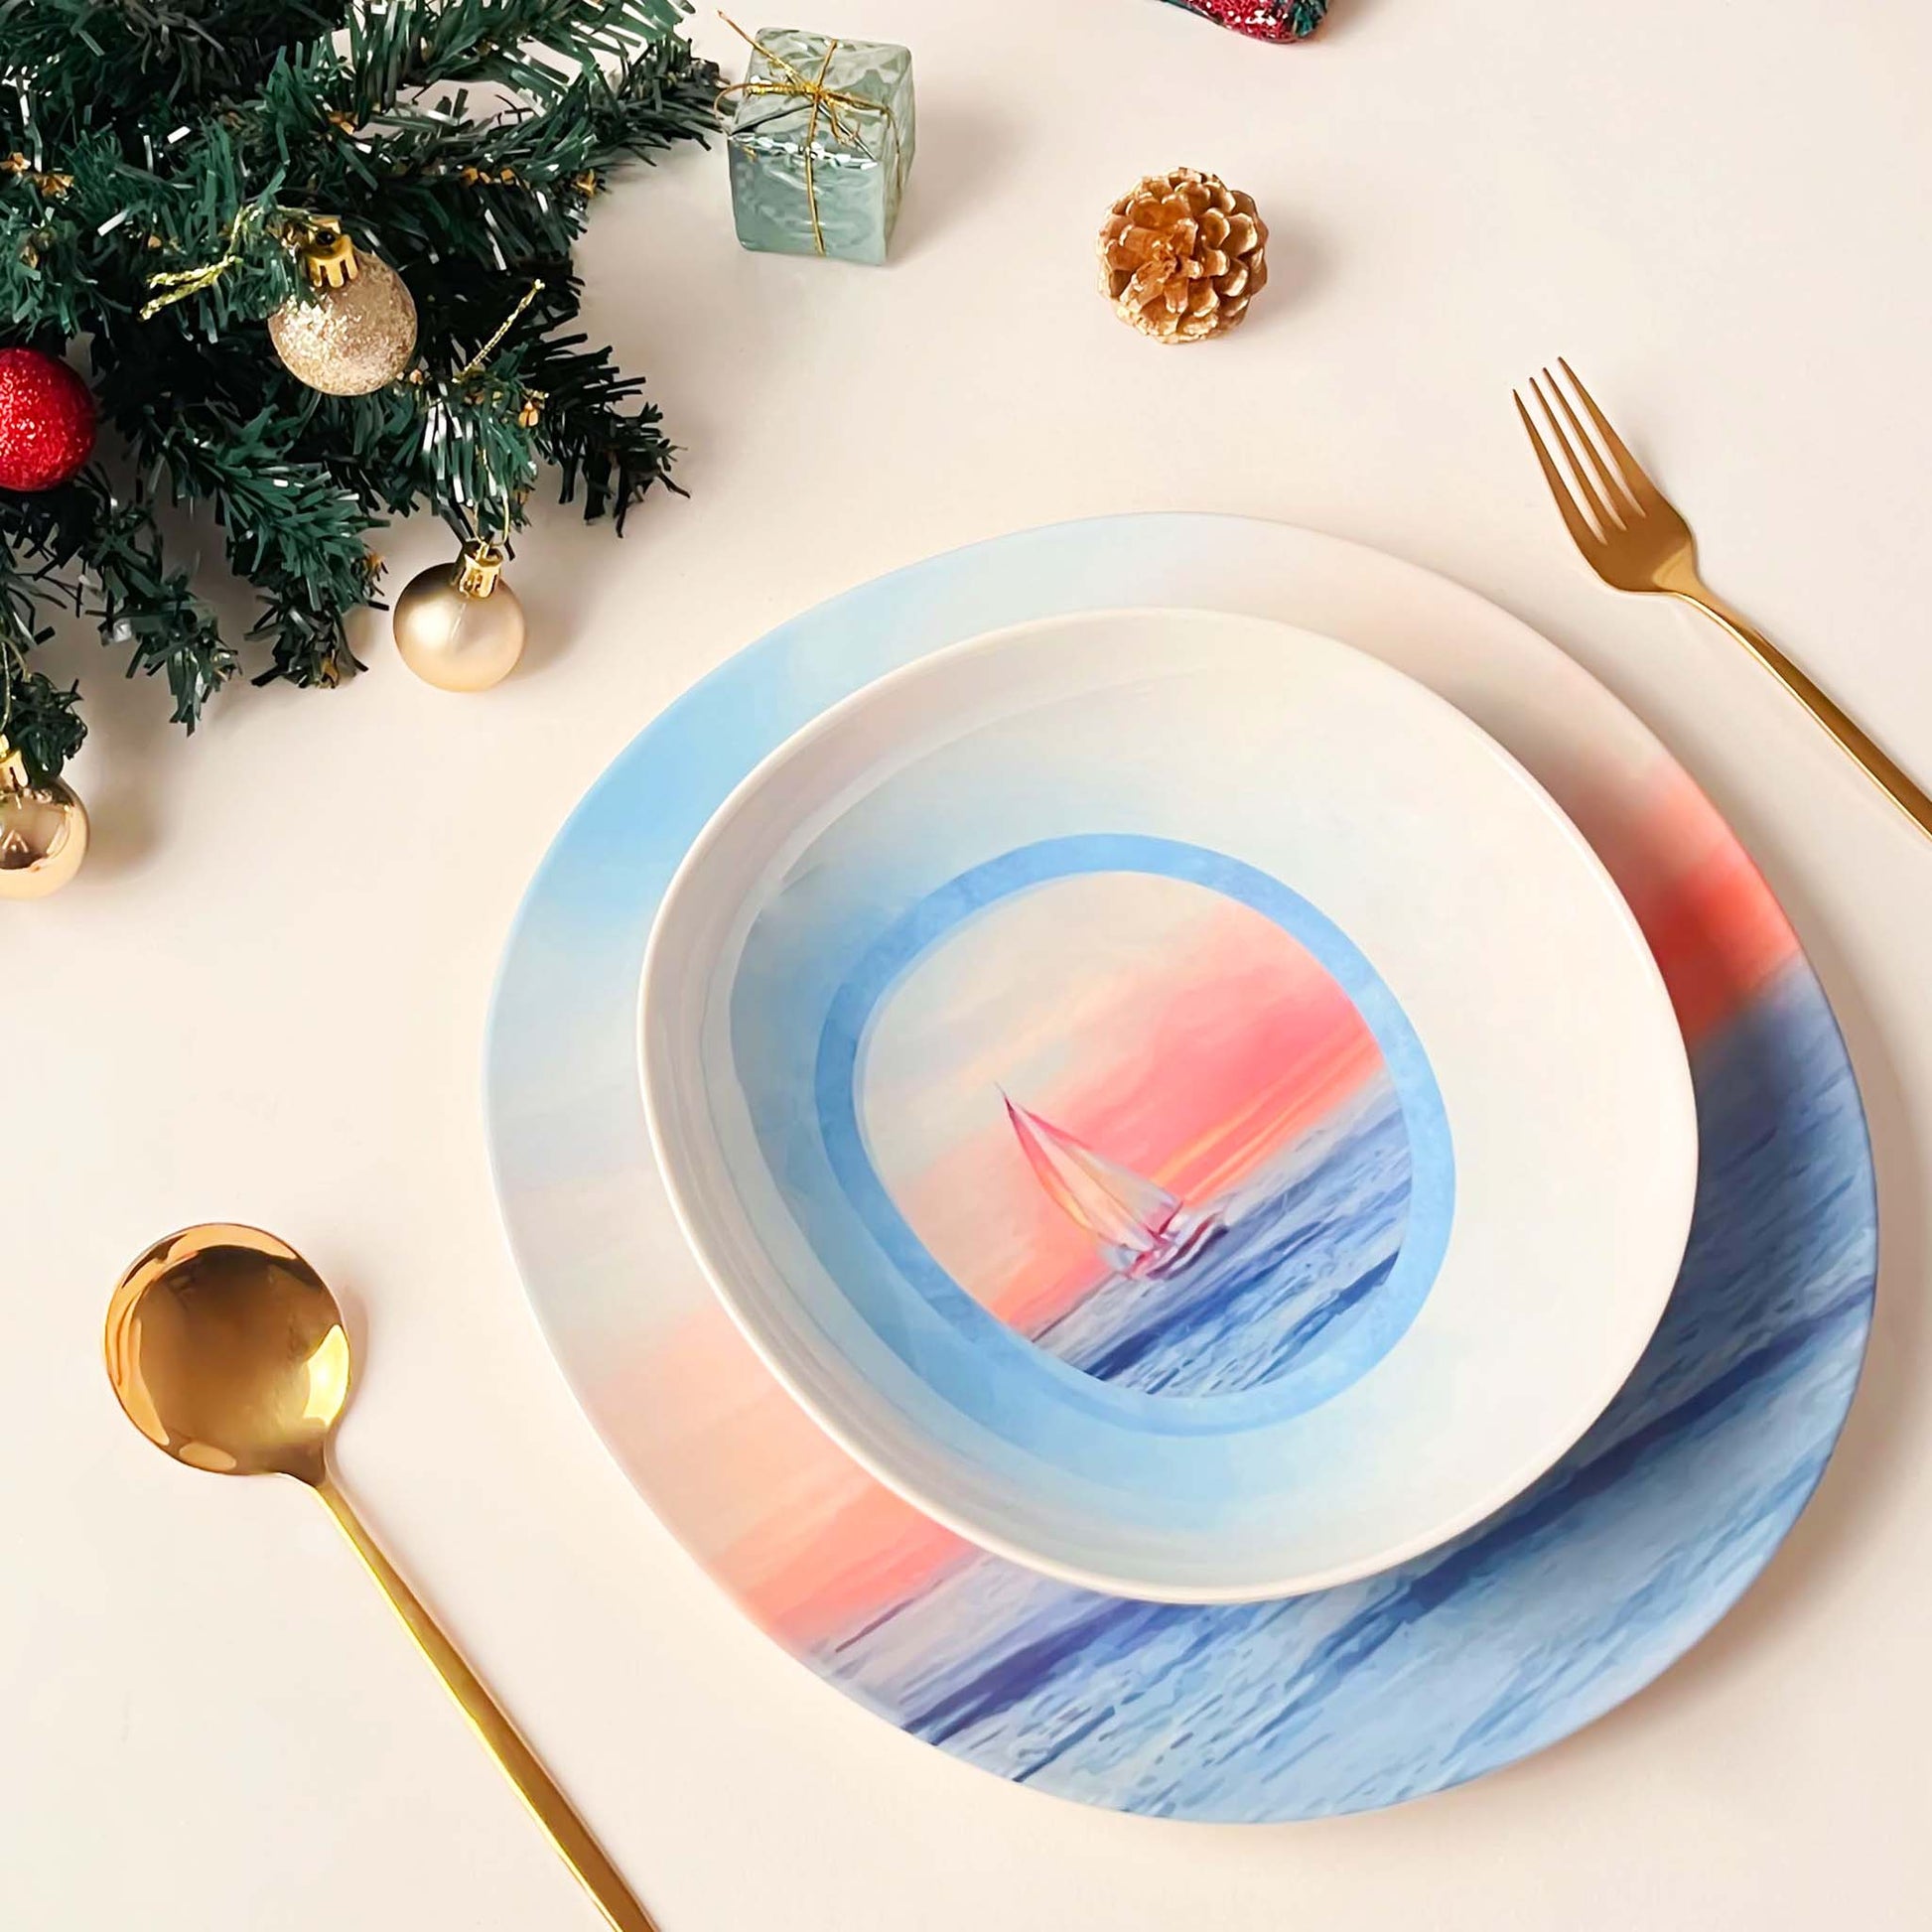 The Plate Story - 8 Pcs Dining Giftset - The Magic Hour